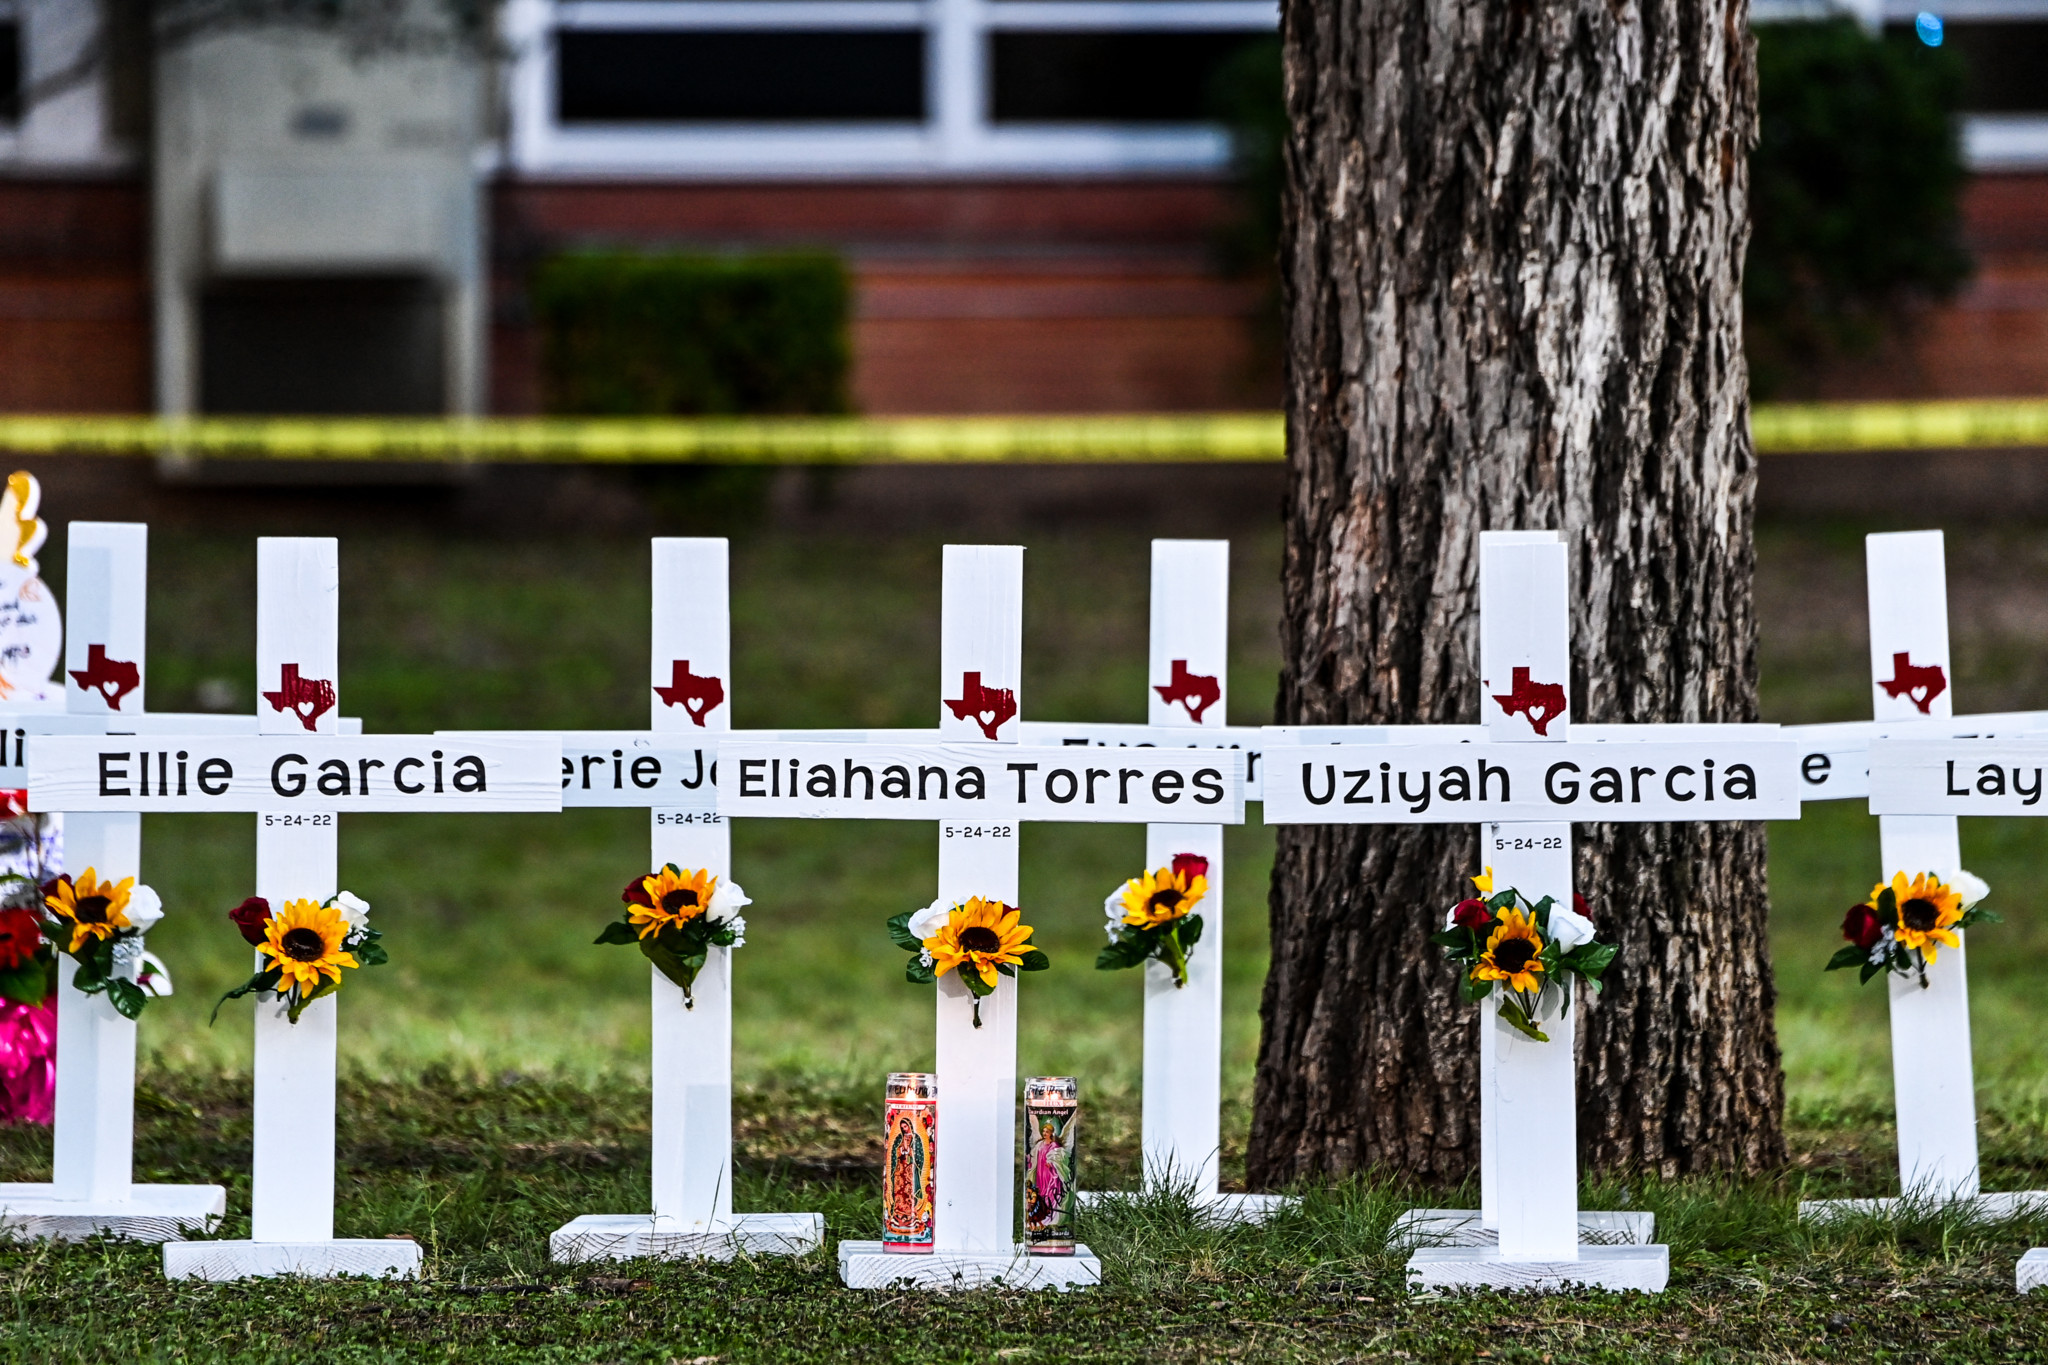 (FILES) Crosses adorn a makeshift memorial for the shooting victims at Robb Elementary School in Uvalde, Texas, on May 26, 2022. US Surgeon General Vivek Murthy on June 25, 2024, issued a landmark advisory declaring gun violence a "public health crisis" and calling for wide-ranging firearm controls that have historically met stiff political opposition. The advisory is the first such major report on gun violence from a surgeon general, whose office has limited authority but plays a significant role in public health issues. (Photo by CHANDAN KHANNA / AFP)